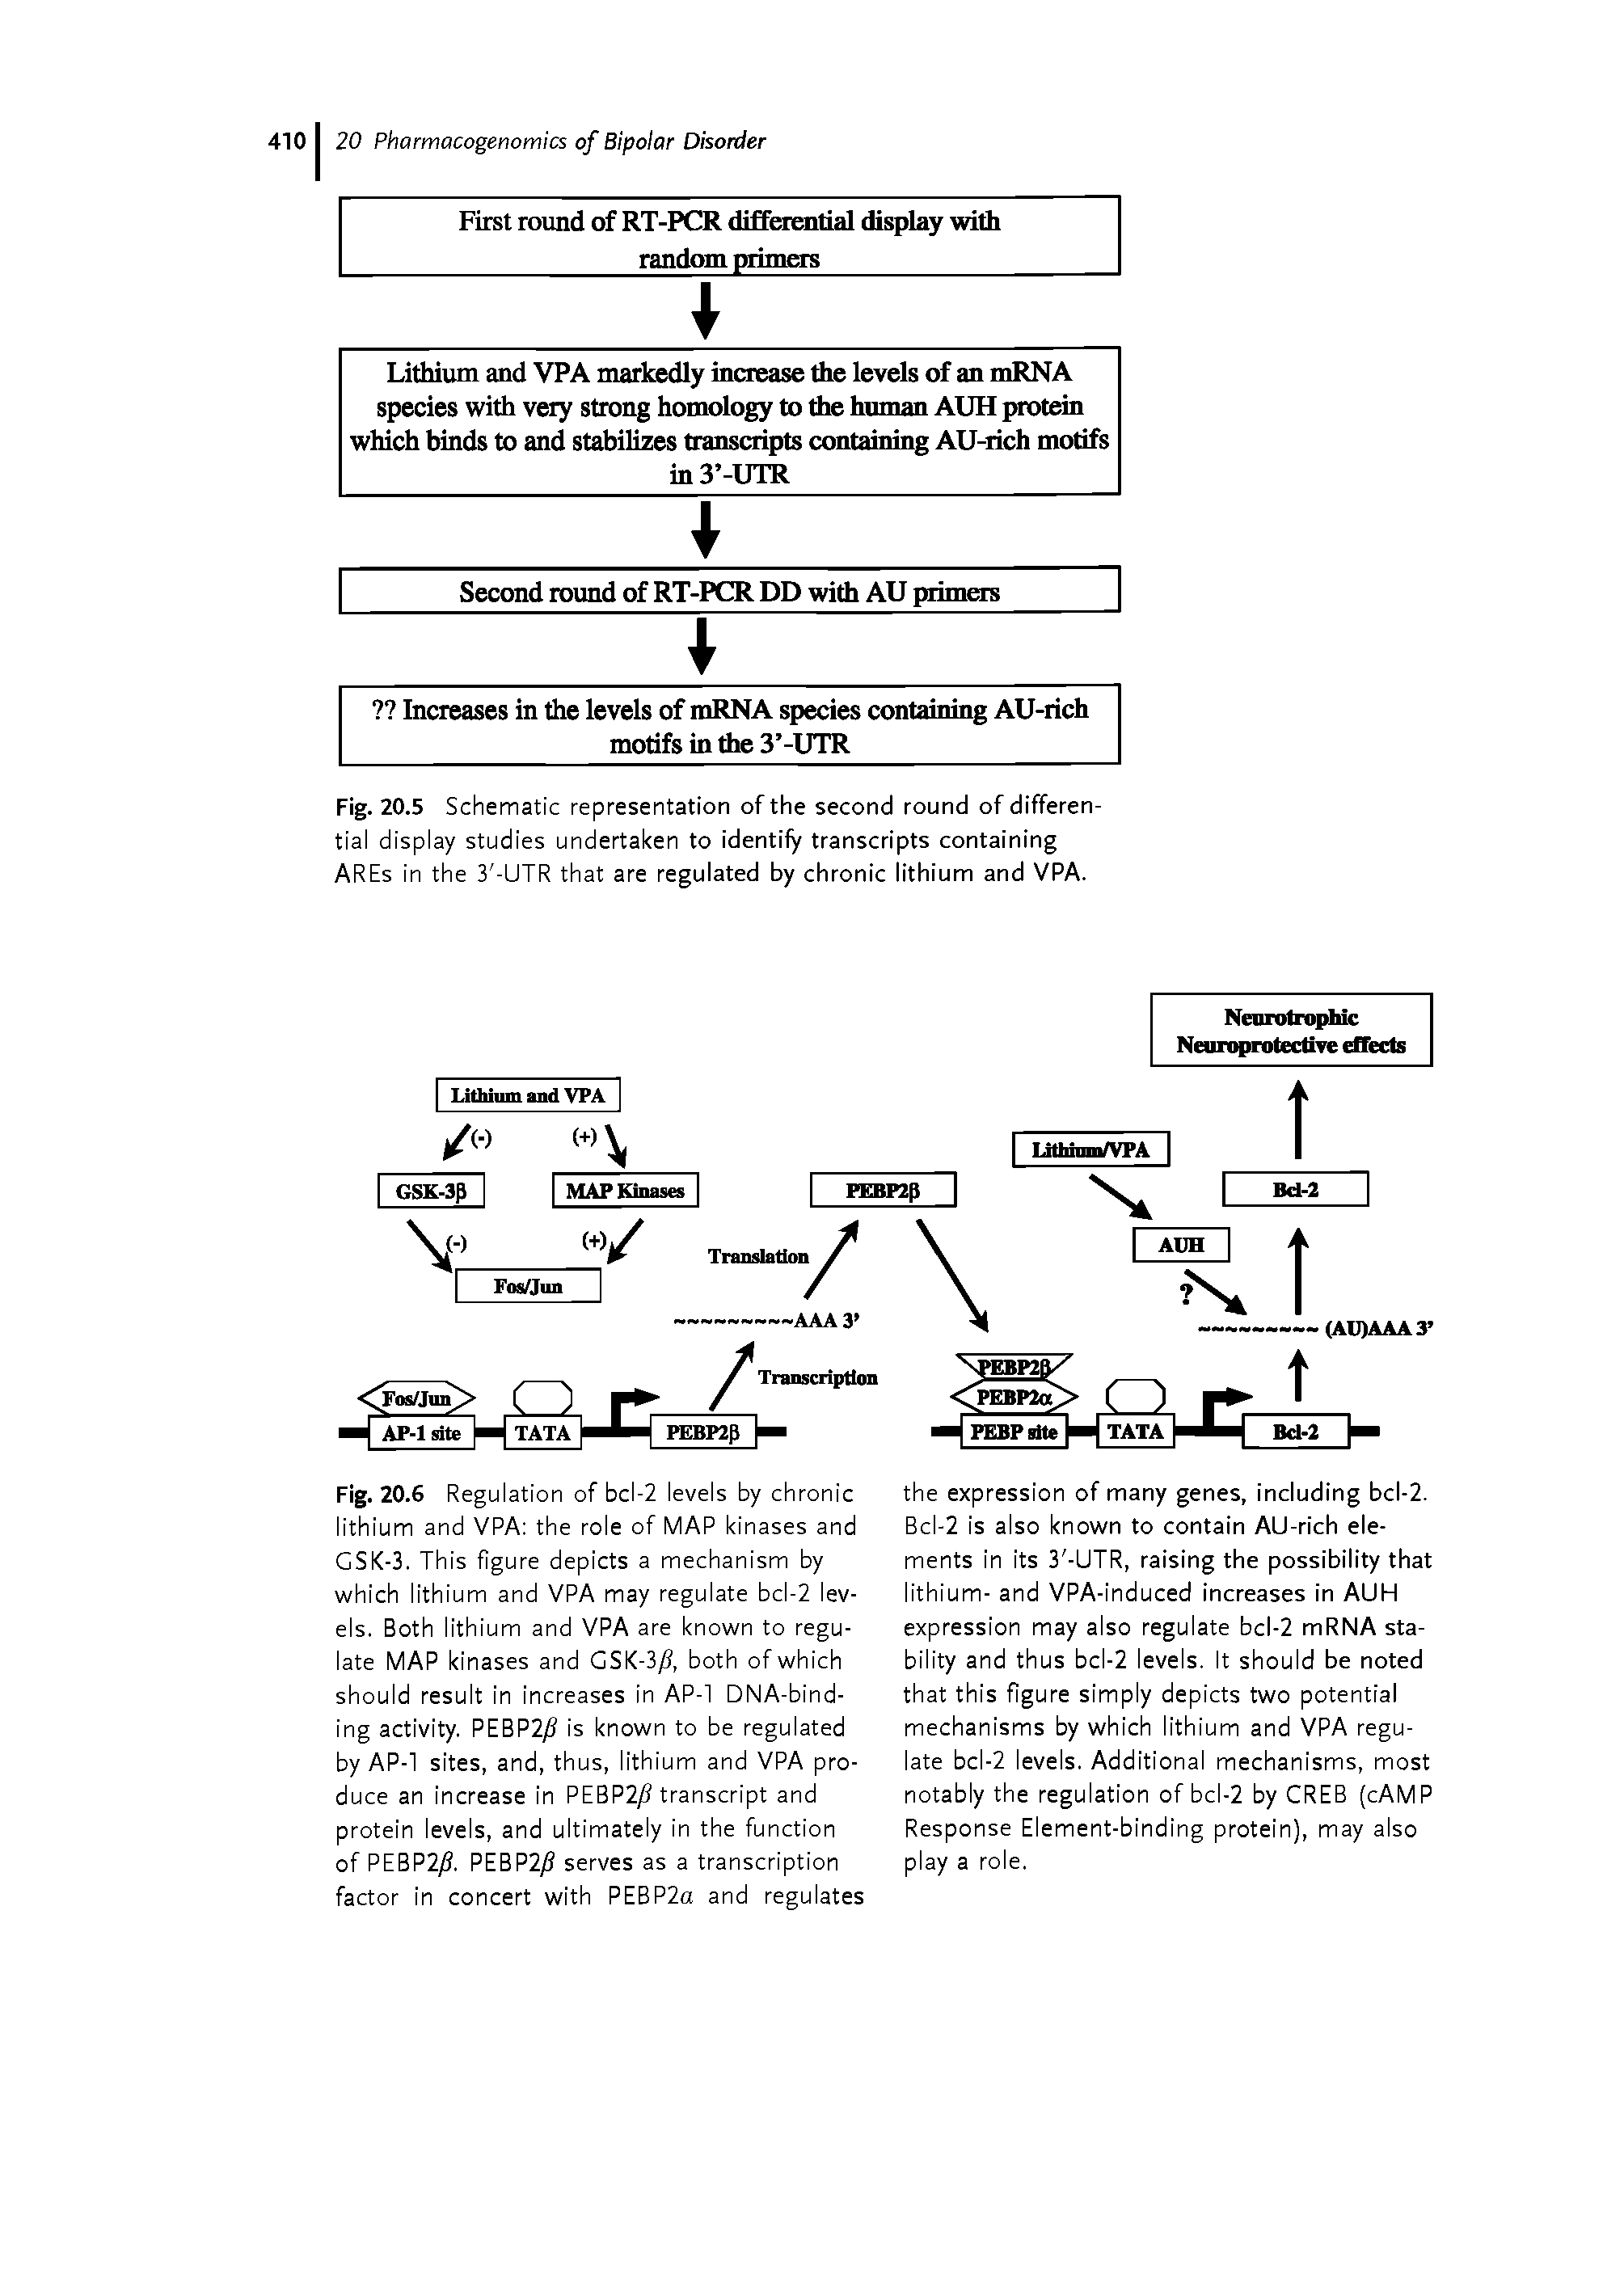 Fig. 20.5 Schematic representation of the second round of differential display studies undertaken to identify transcripts containing AREs in the 3 -UTR that are regulated by chronic lithium and VPA.